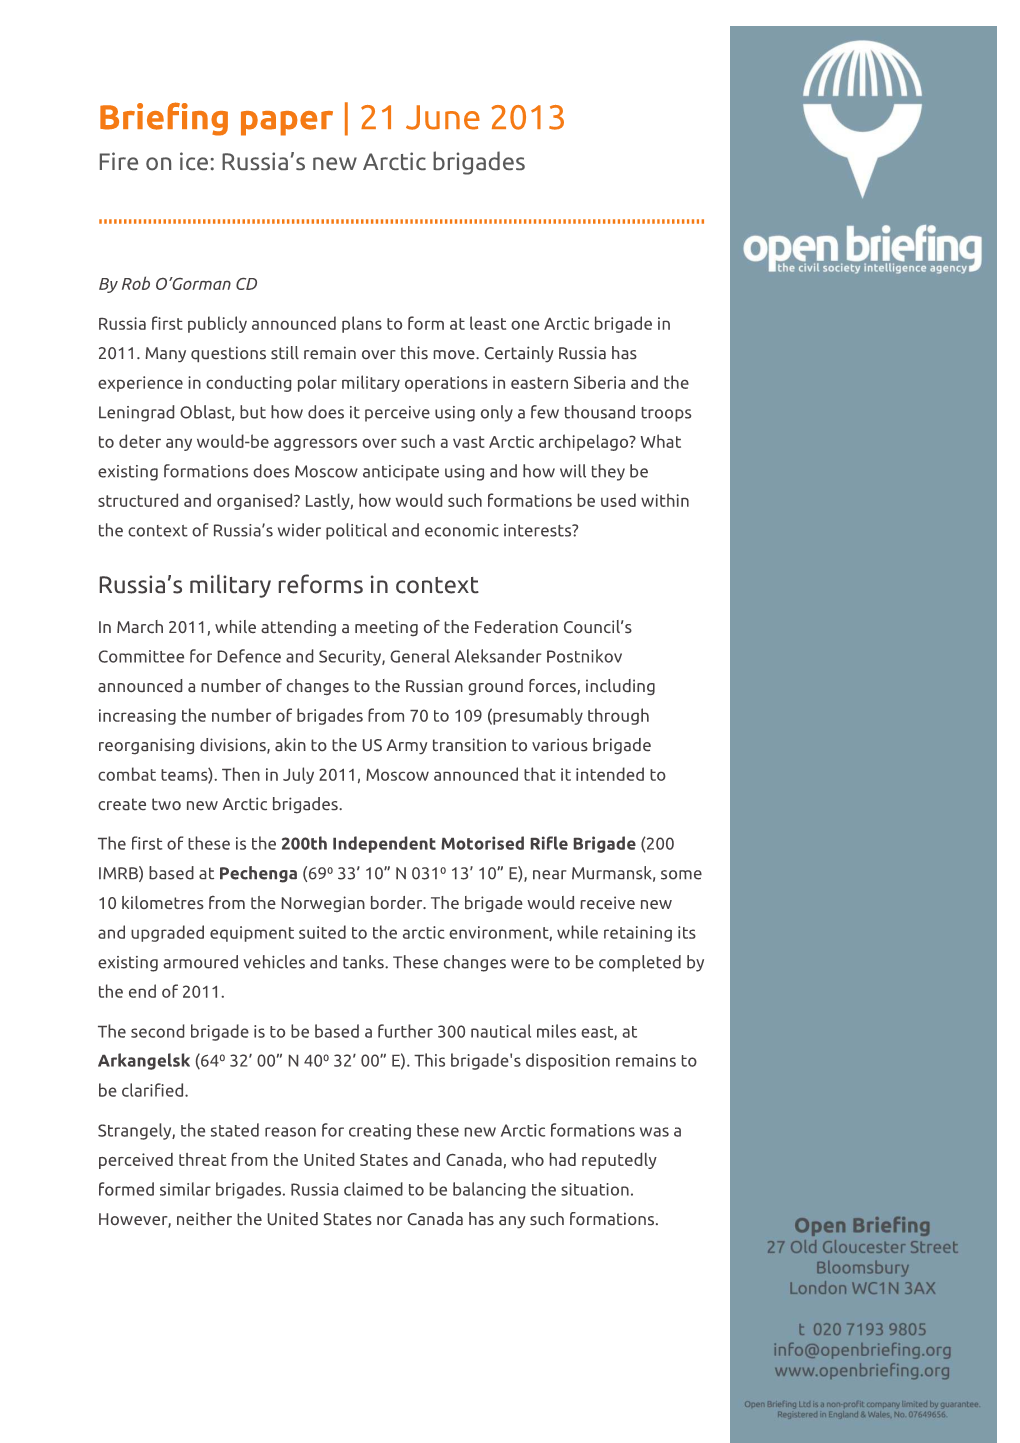 Briefing Paper | 21 June 2013 Fire on Ice: Russia’S New Arctic Brigades